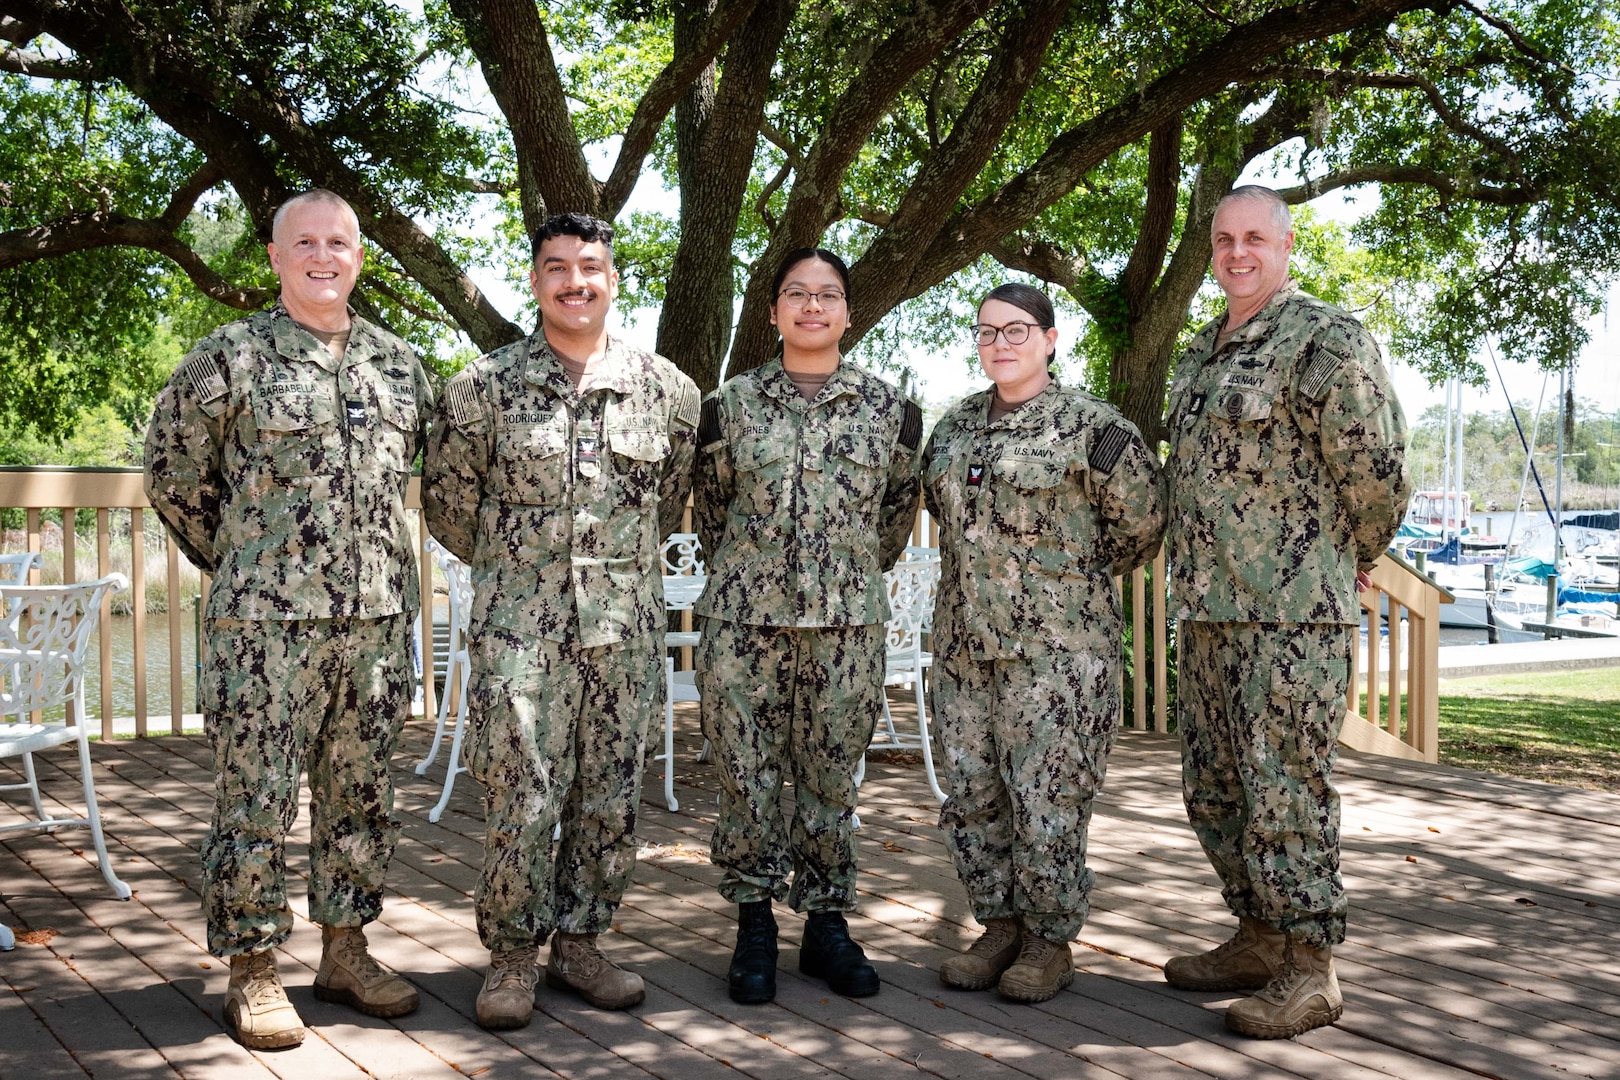 Honored with of the Quarter awards, from left to right, were Hospital Corpsman Third Class Miguel Rodriguez as Junior Sailor of the Quarter, Hospitalman Ma’Angeline Viernes as Blue Jacket of the Quarter and Hospital Corpsman Second Class Ashlyn Sanders as the Sailor of the Quarter.